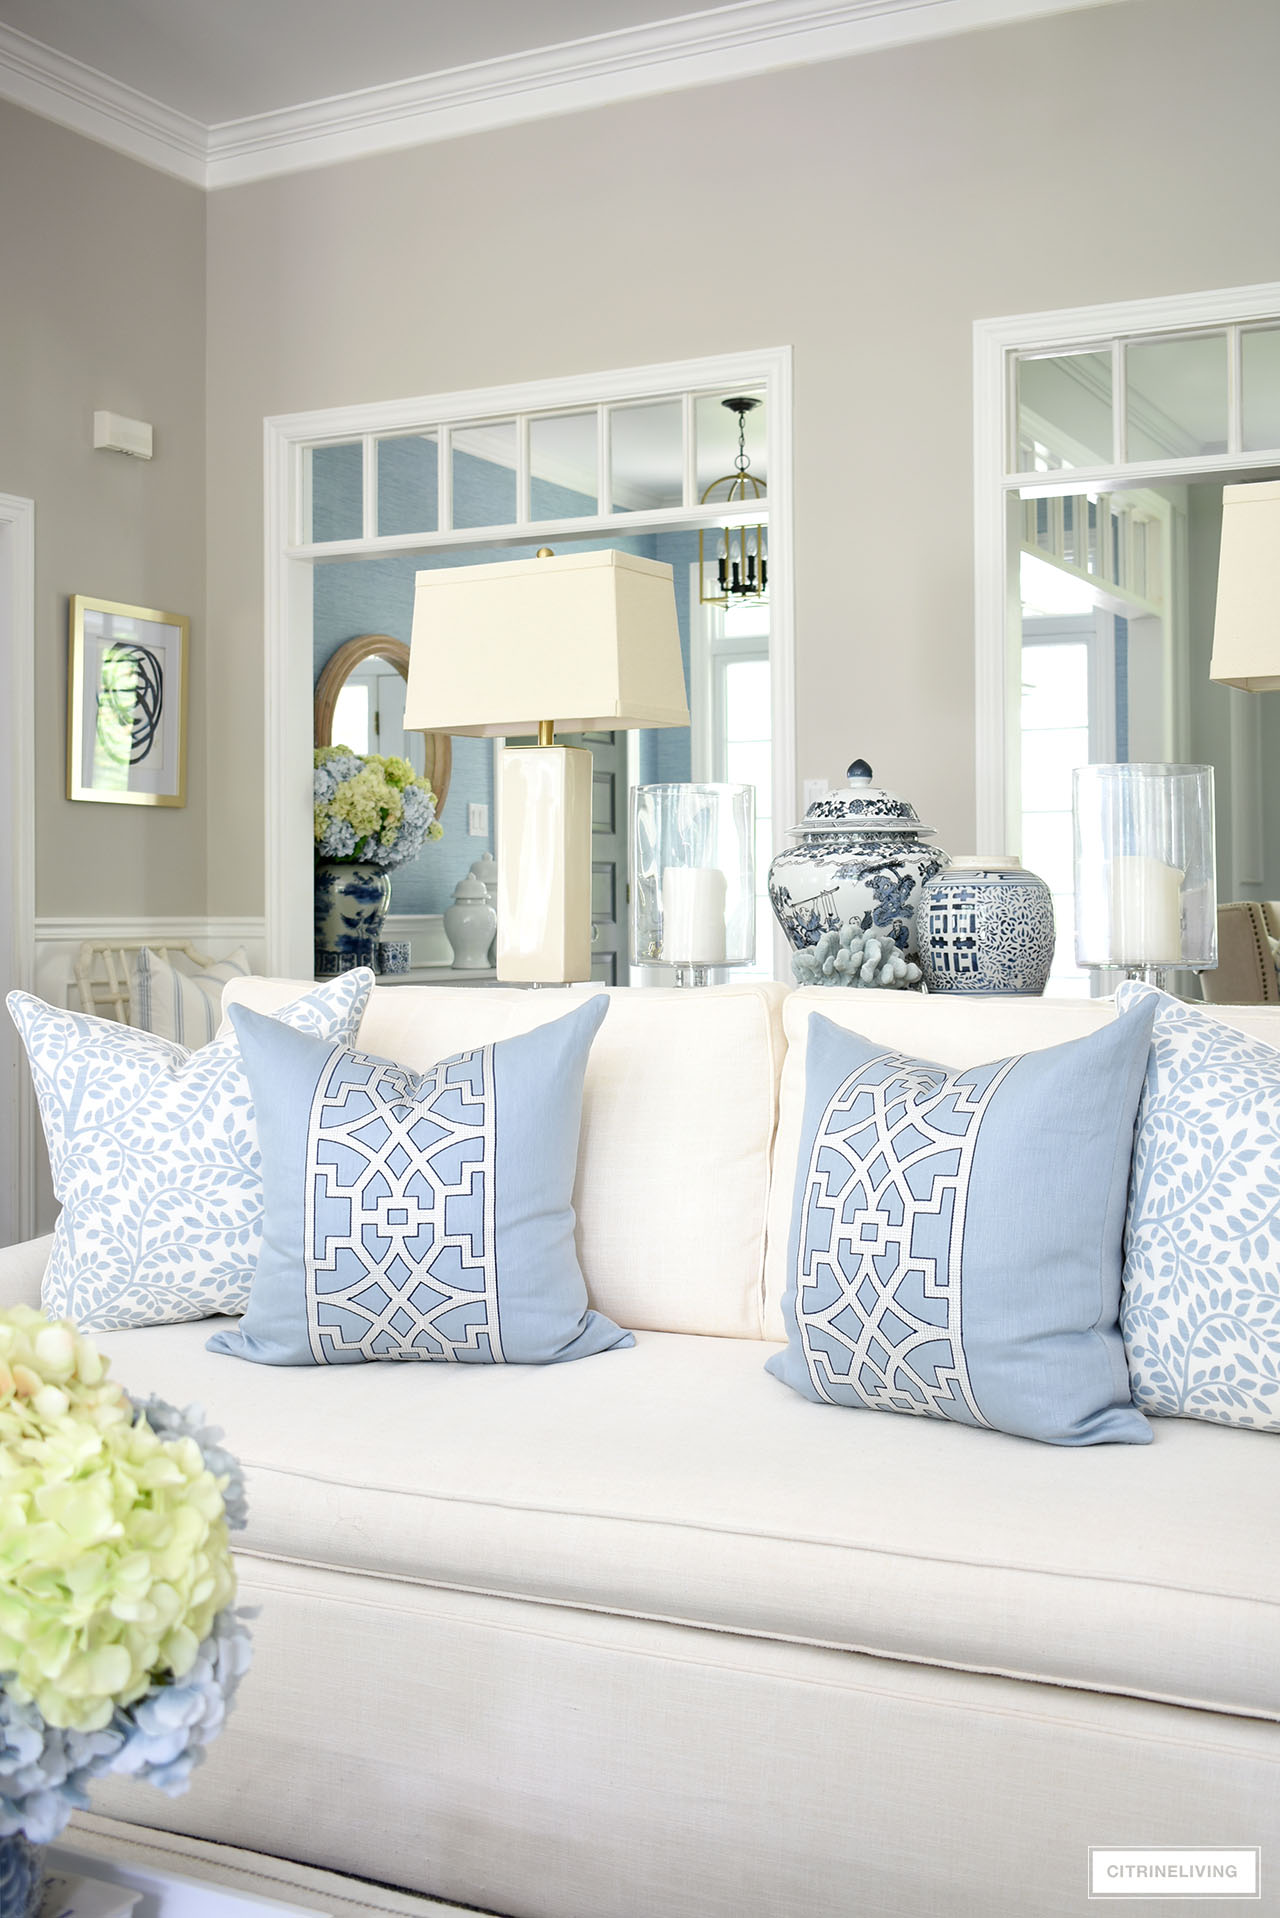 Gorgeous pillows styled on a white sofa for summer - blue with a white trellis motif and an overall leaf pattern in a light blue on a white ground.